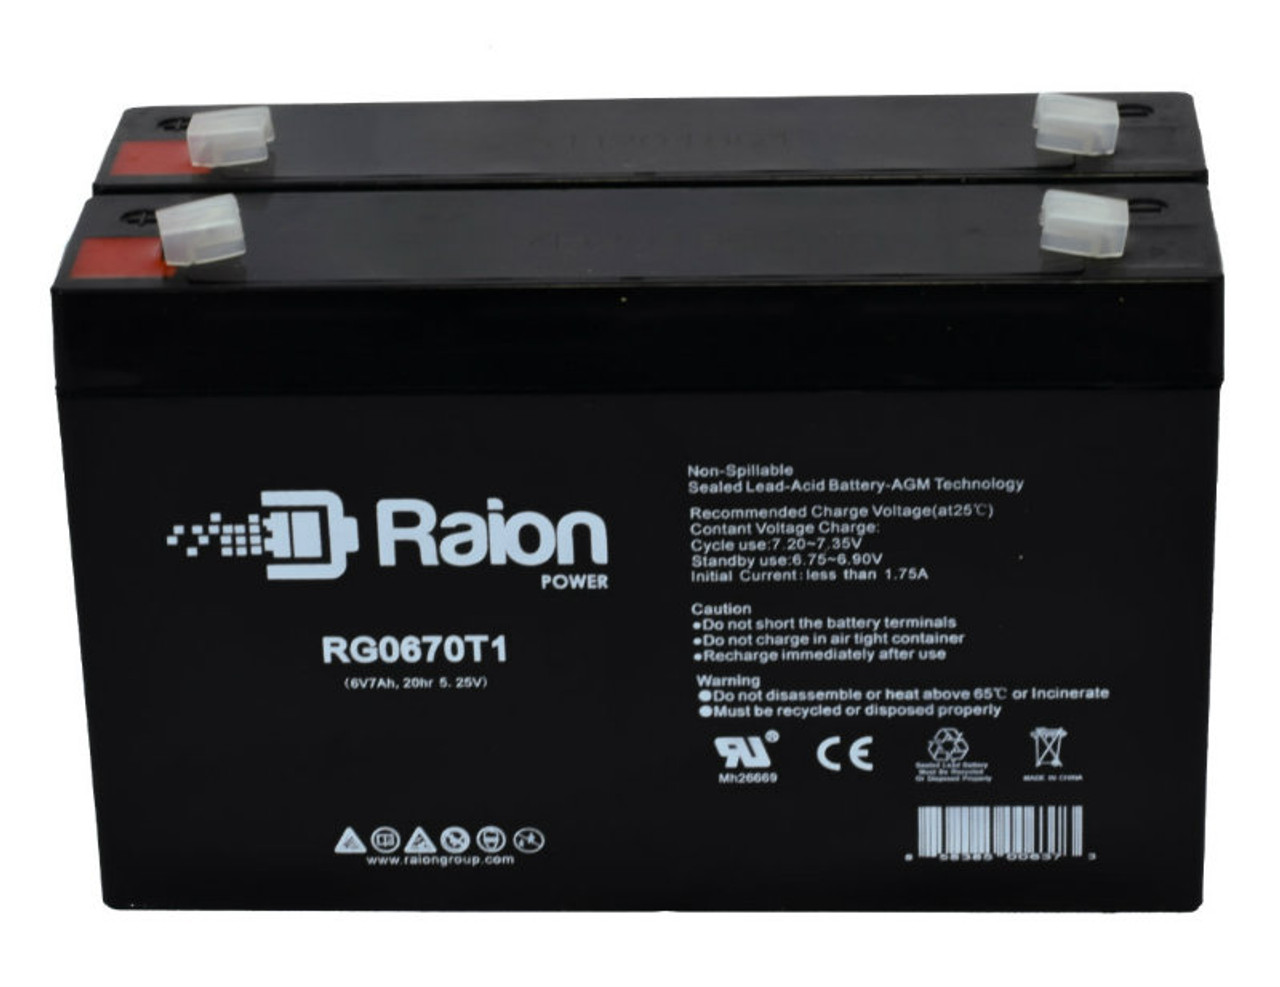 Raion Power RG0670T1 6V 7Ah Replacement Emergency Light Battery for Dual Lite 0120824 - 2 Pack